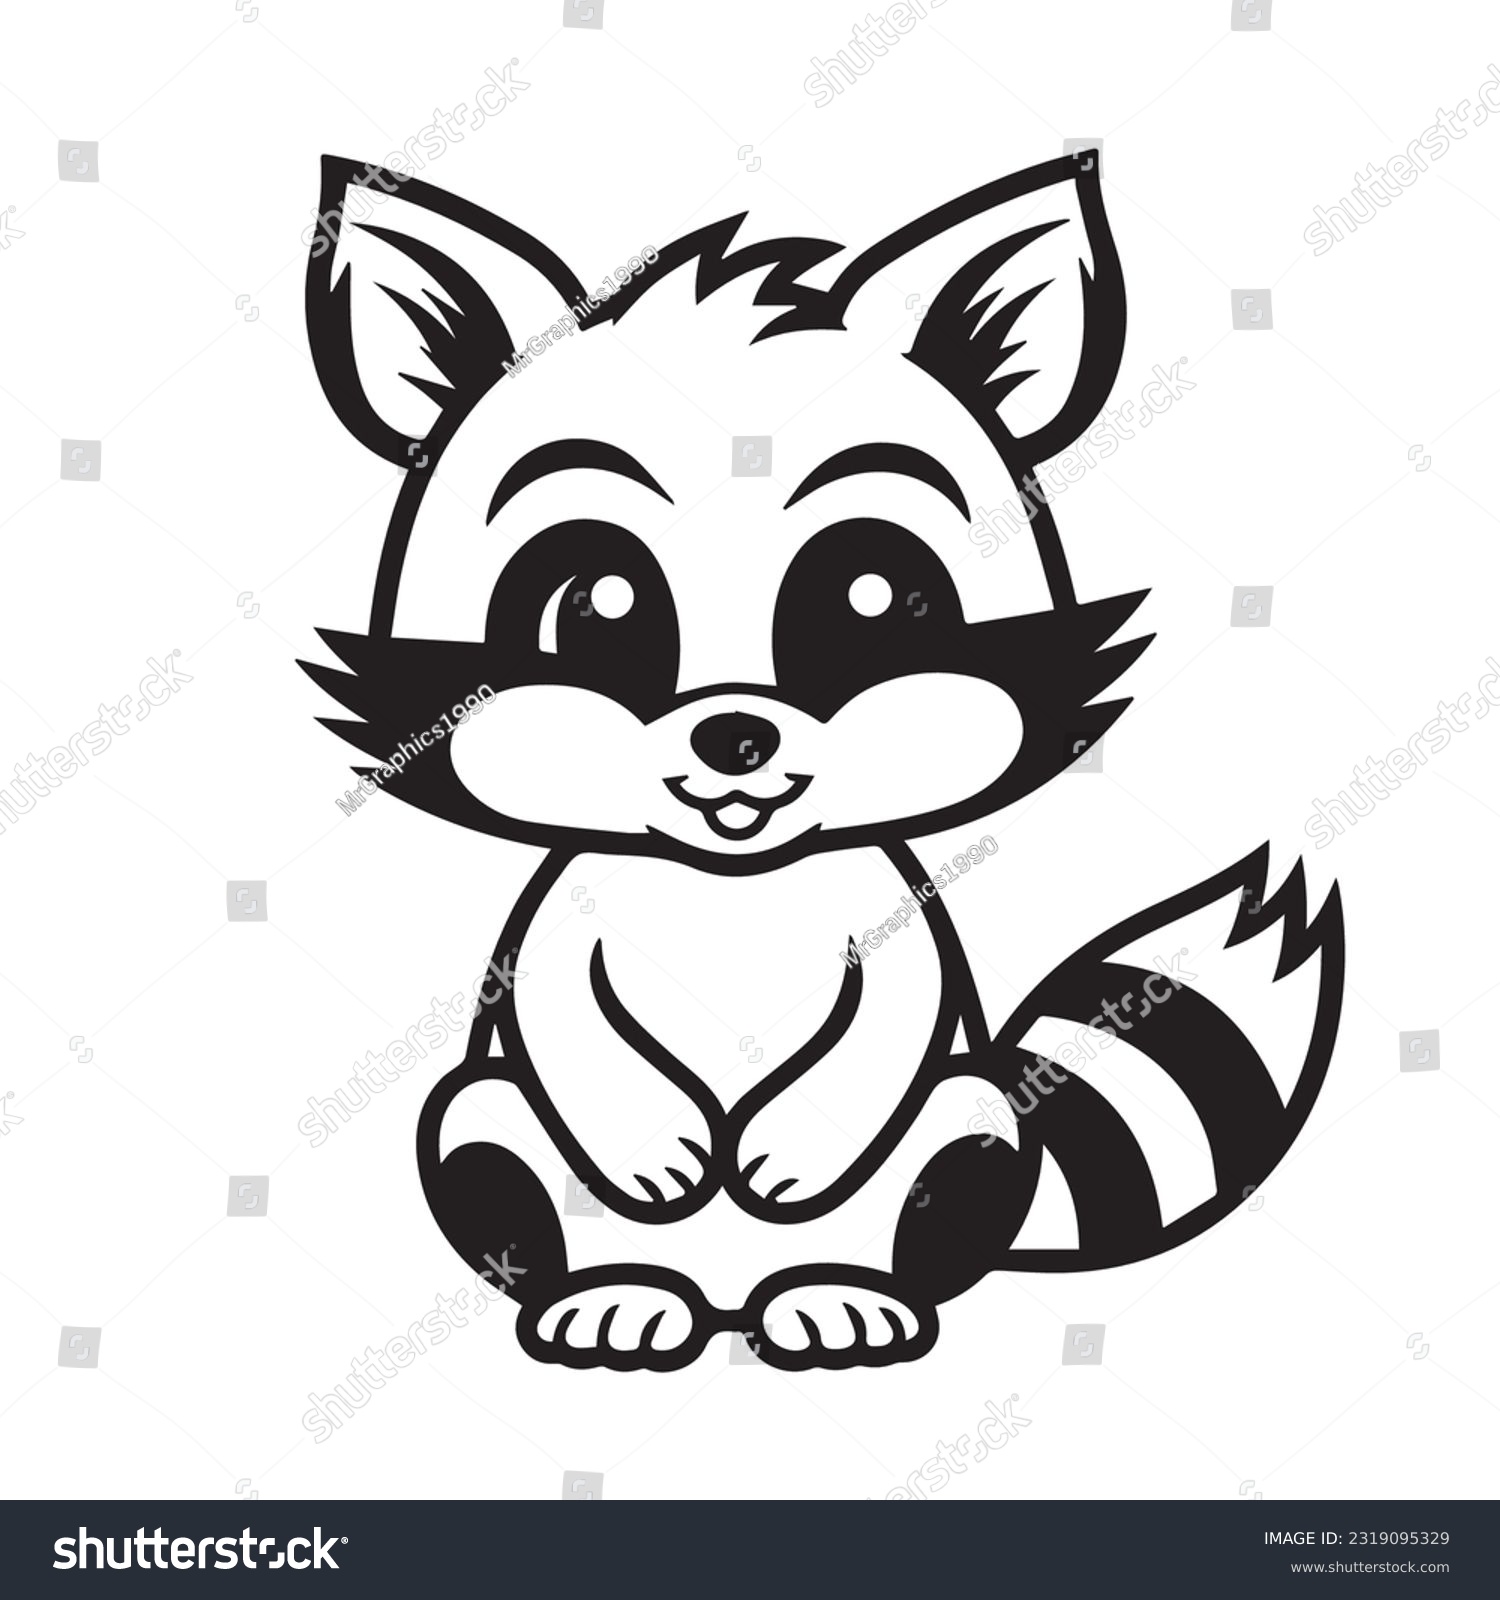 Raccoon coloring page images stock photos d objects vectors